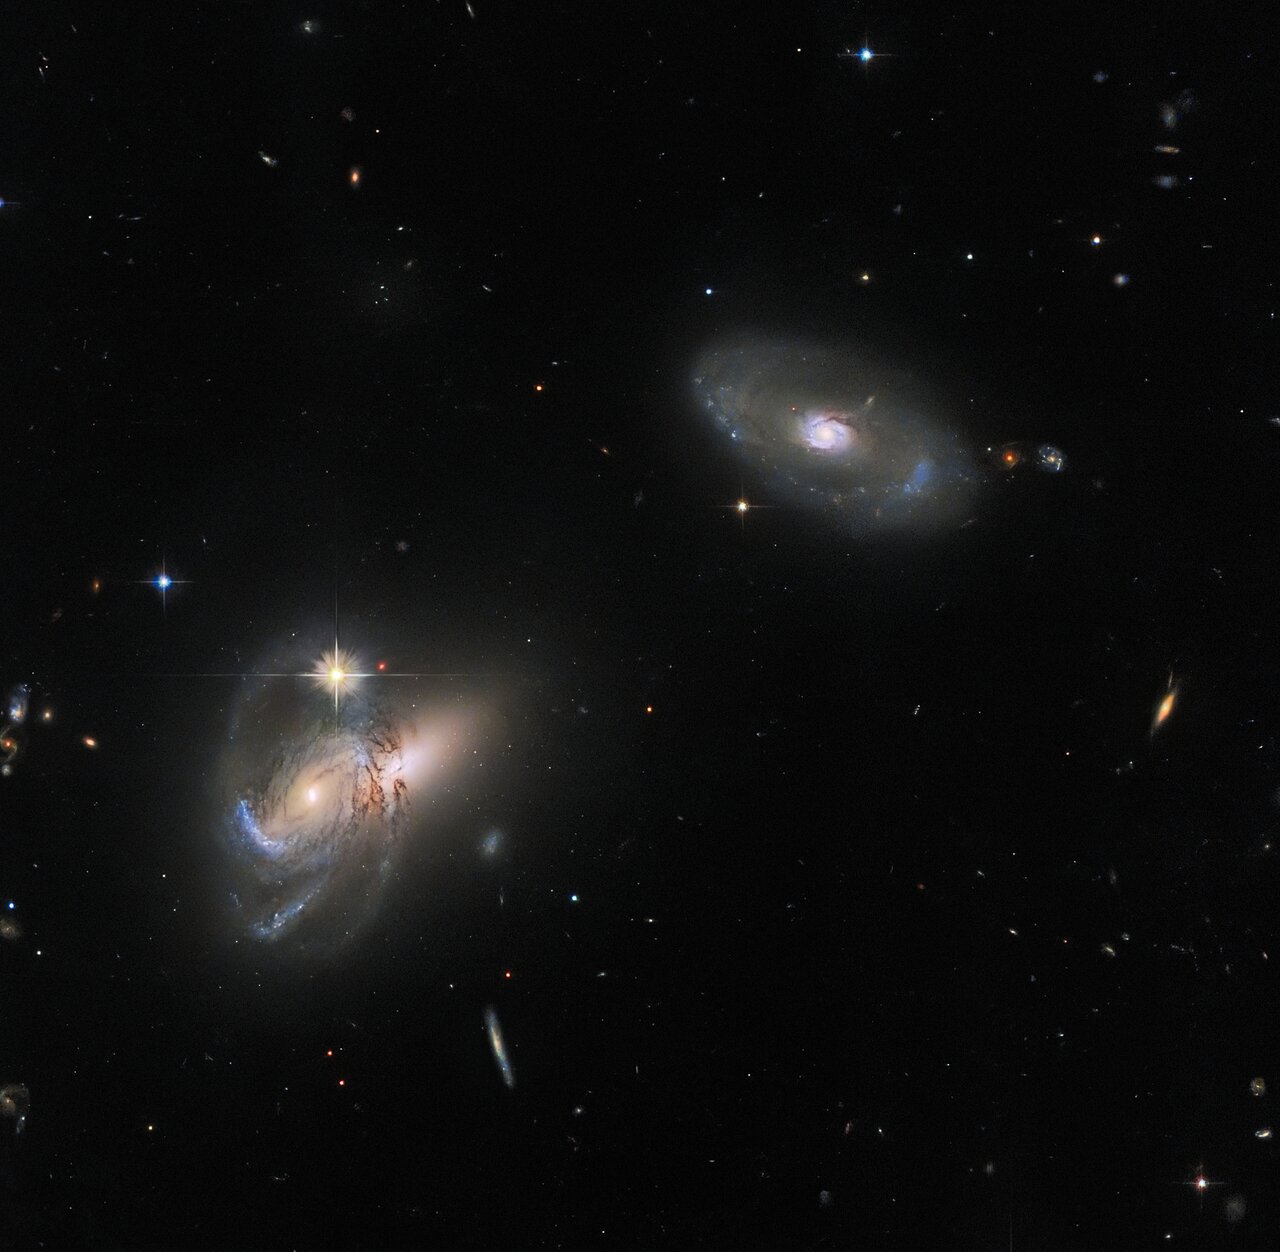 Hubble captures a diverse trio of galactic objects